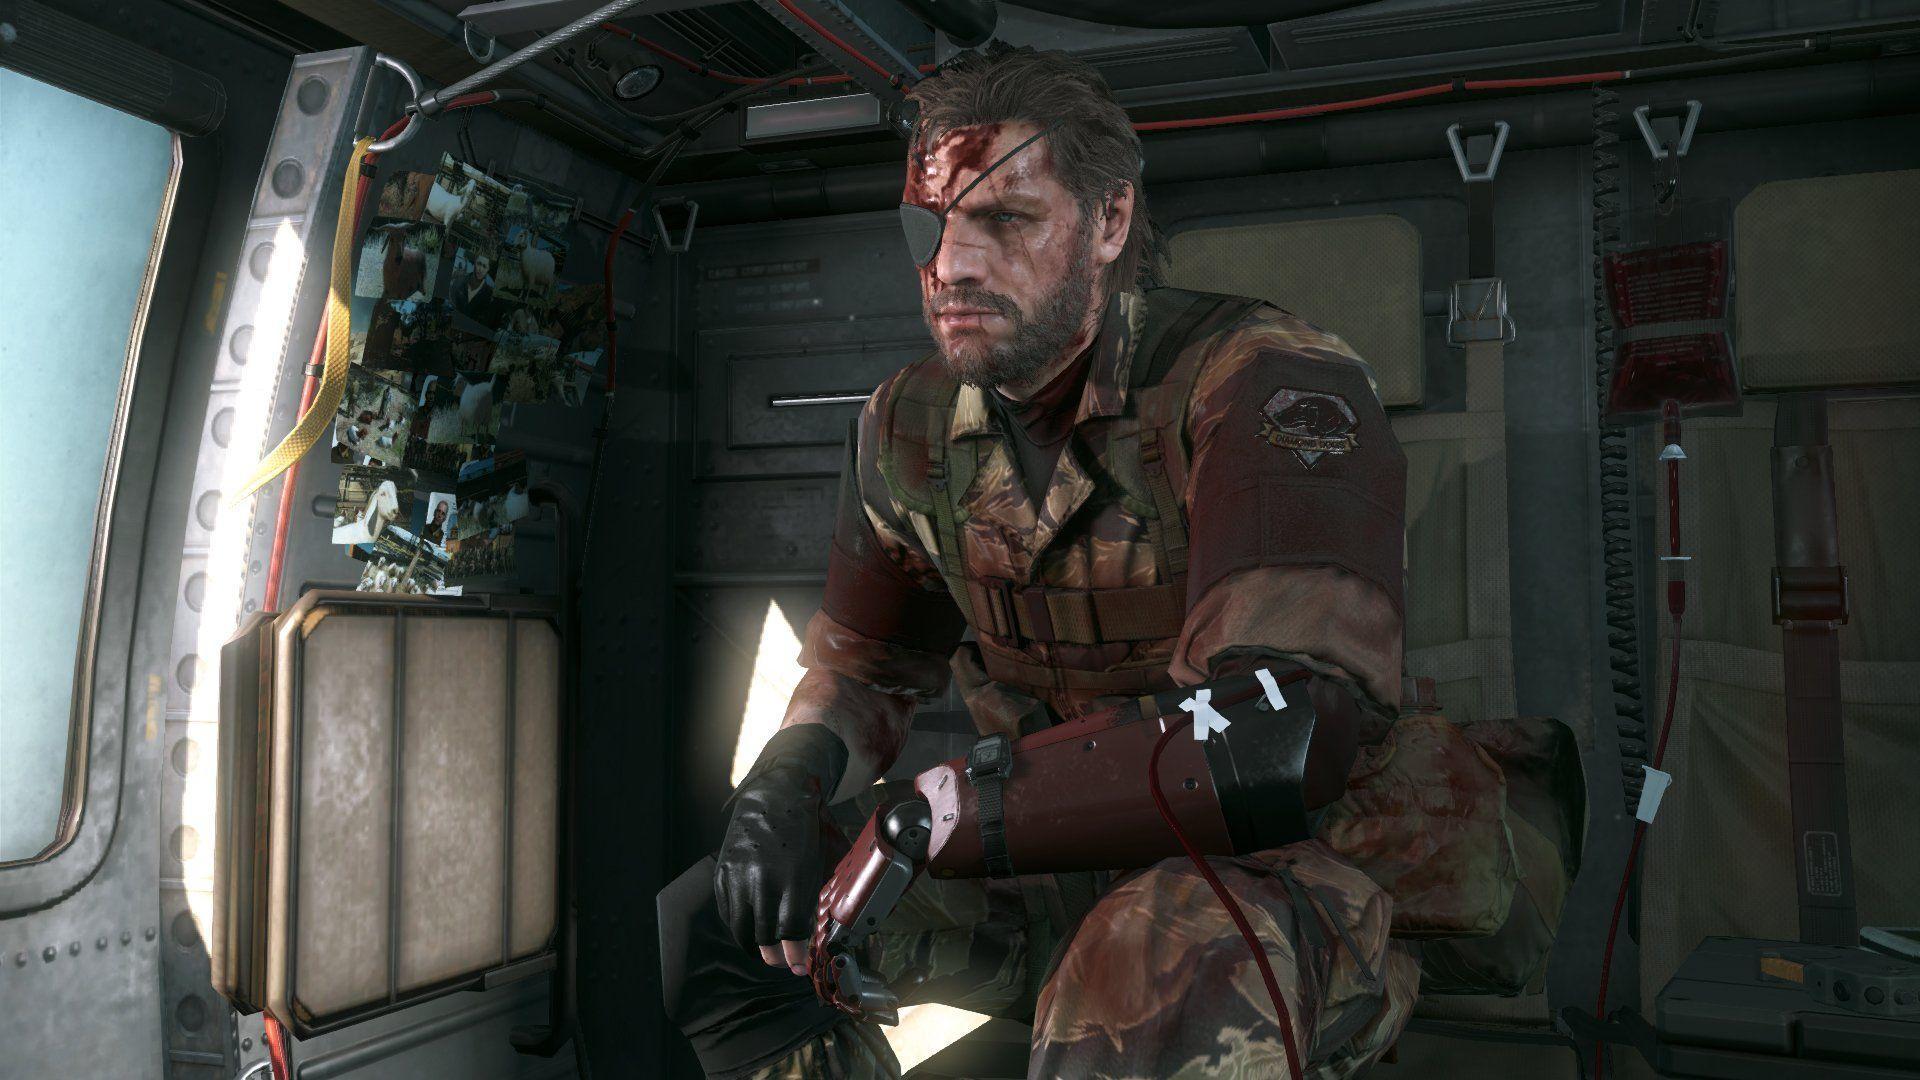 Metal Gear Solid V The Phantom Pain Hd Wallpapers Wallpaper Cave